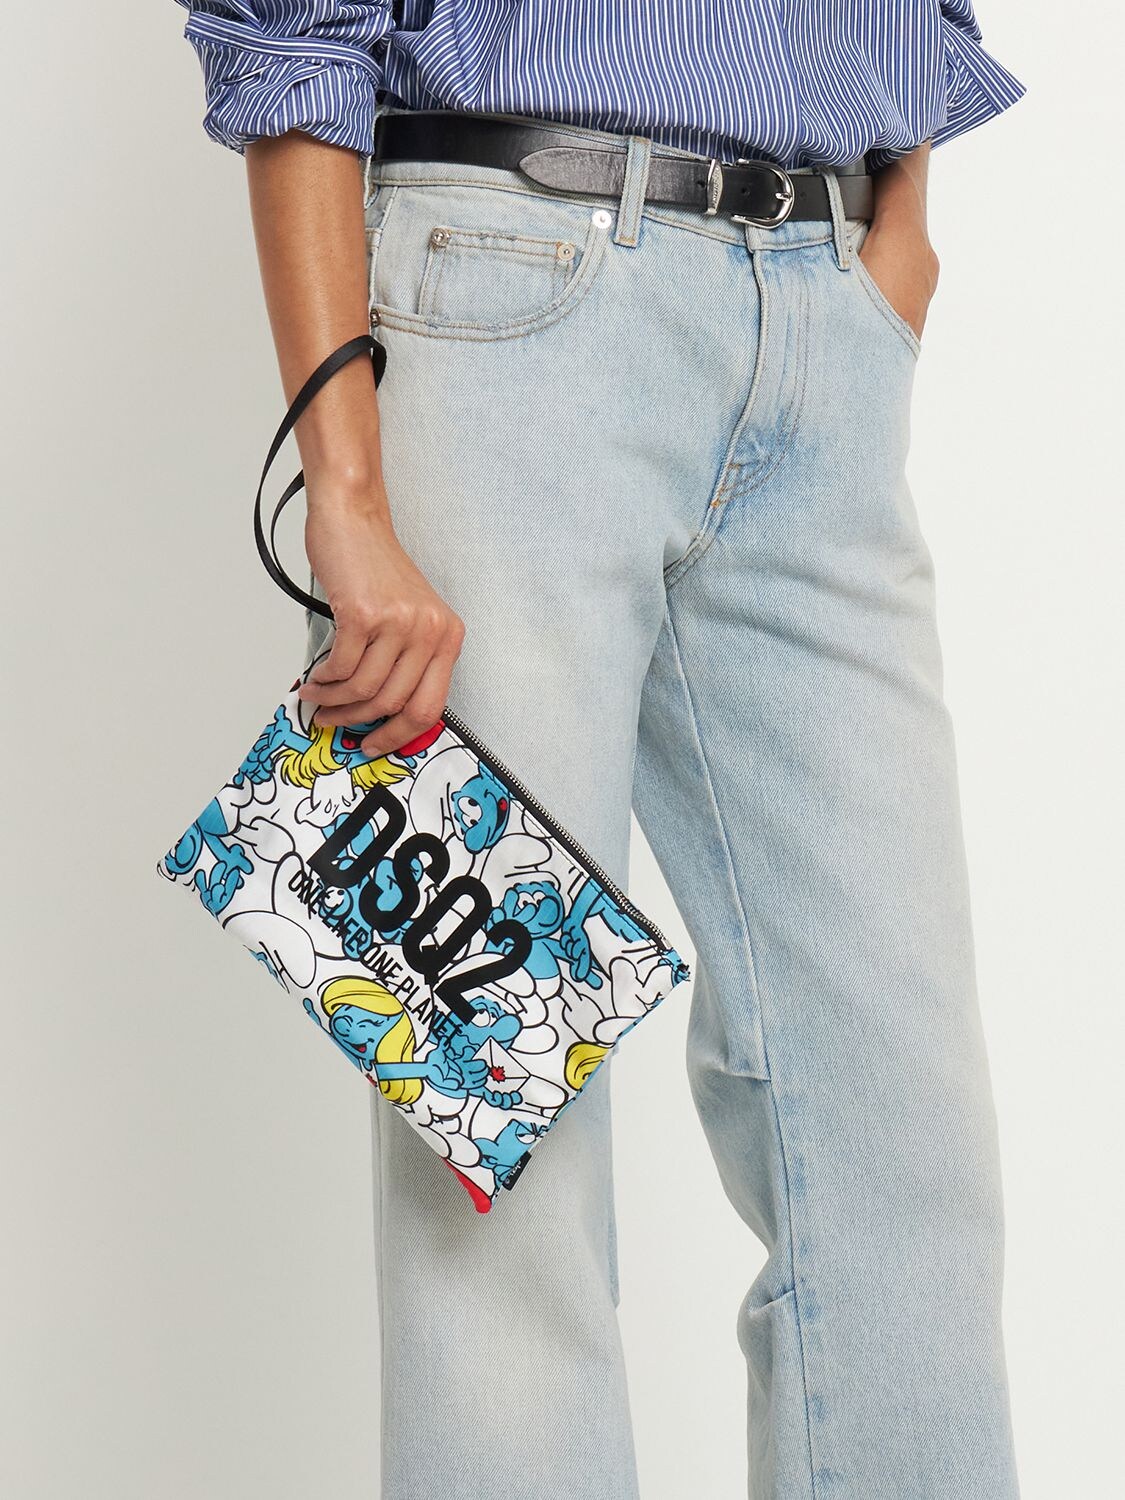 Dsquared2 Smurfs Crowd Zip Pouch In Multicolor | ModeSens